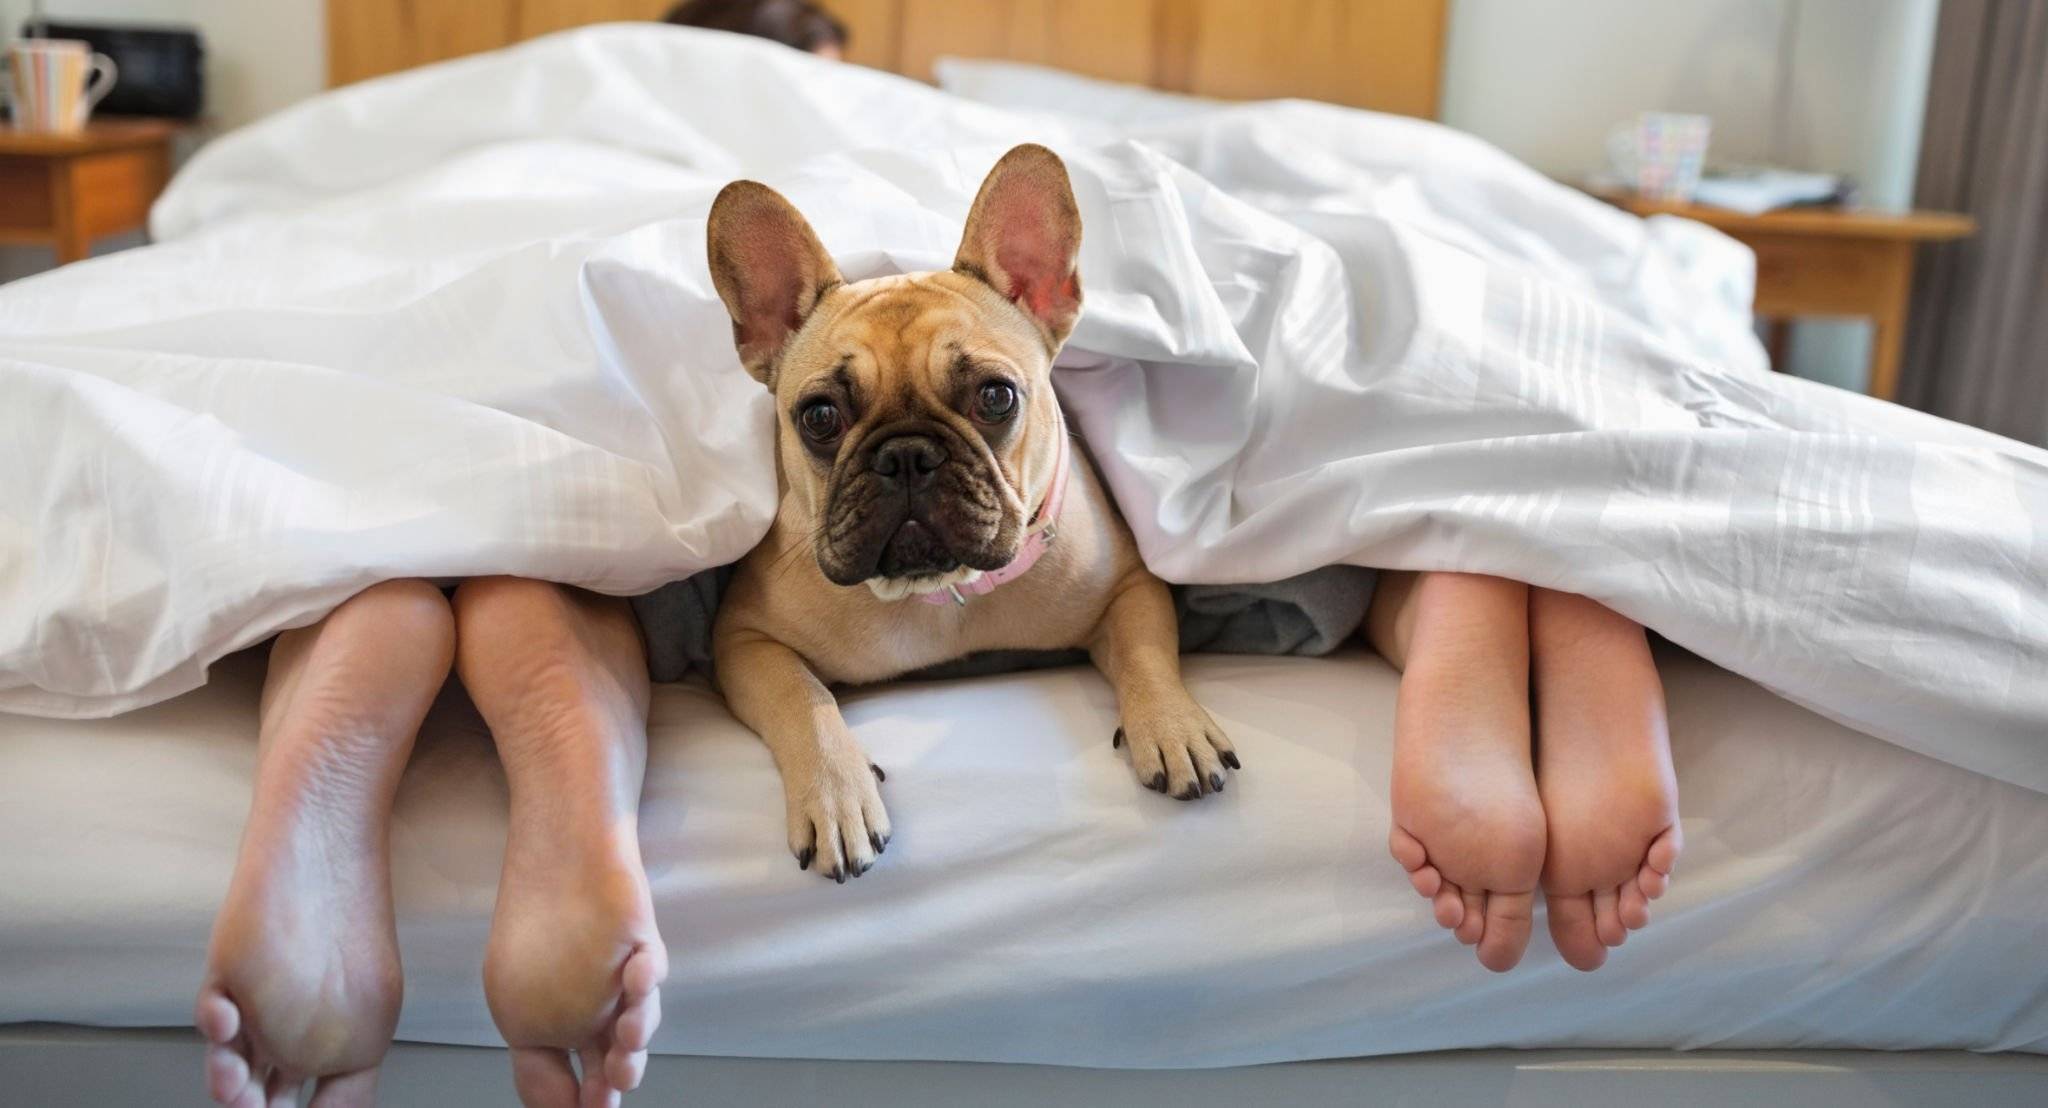 Bulldog dog sleeping with its owners couple 10 Diseases You Can Get if You Sleep with Dogs